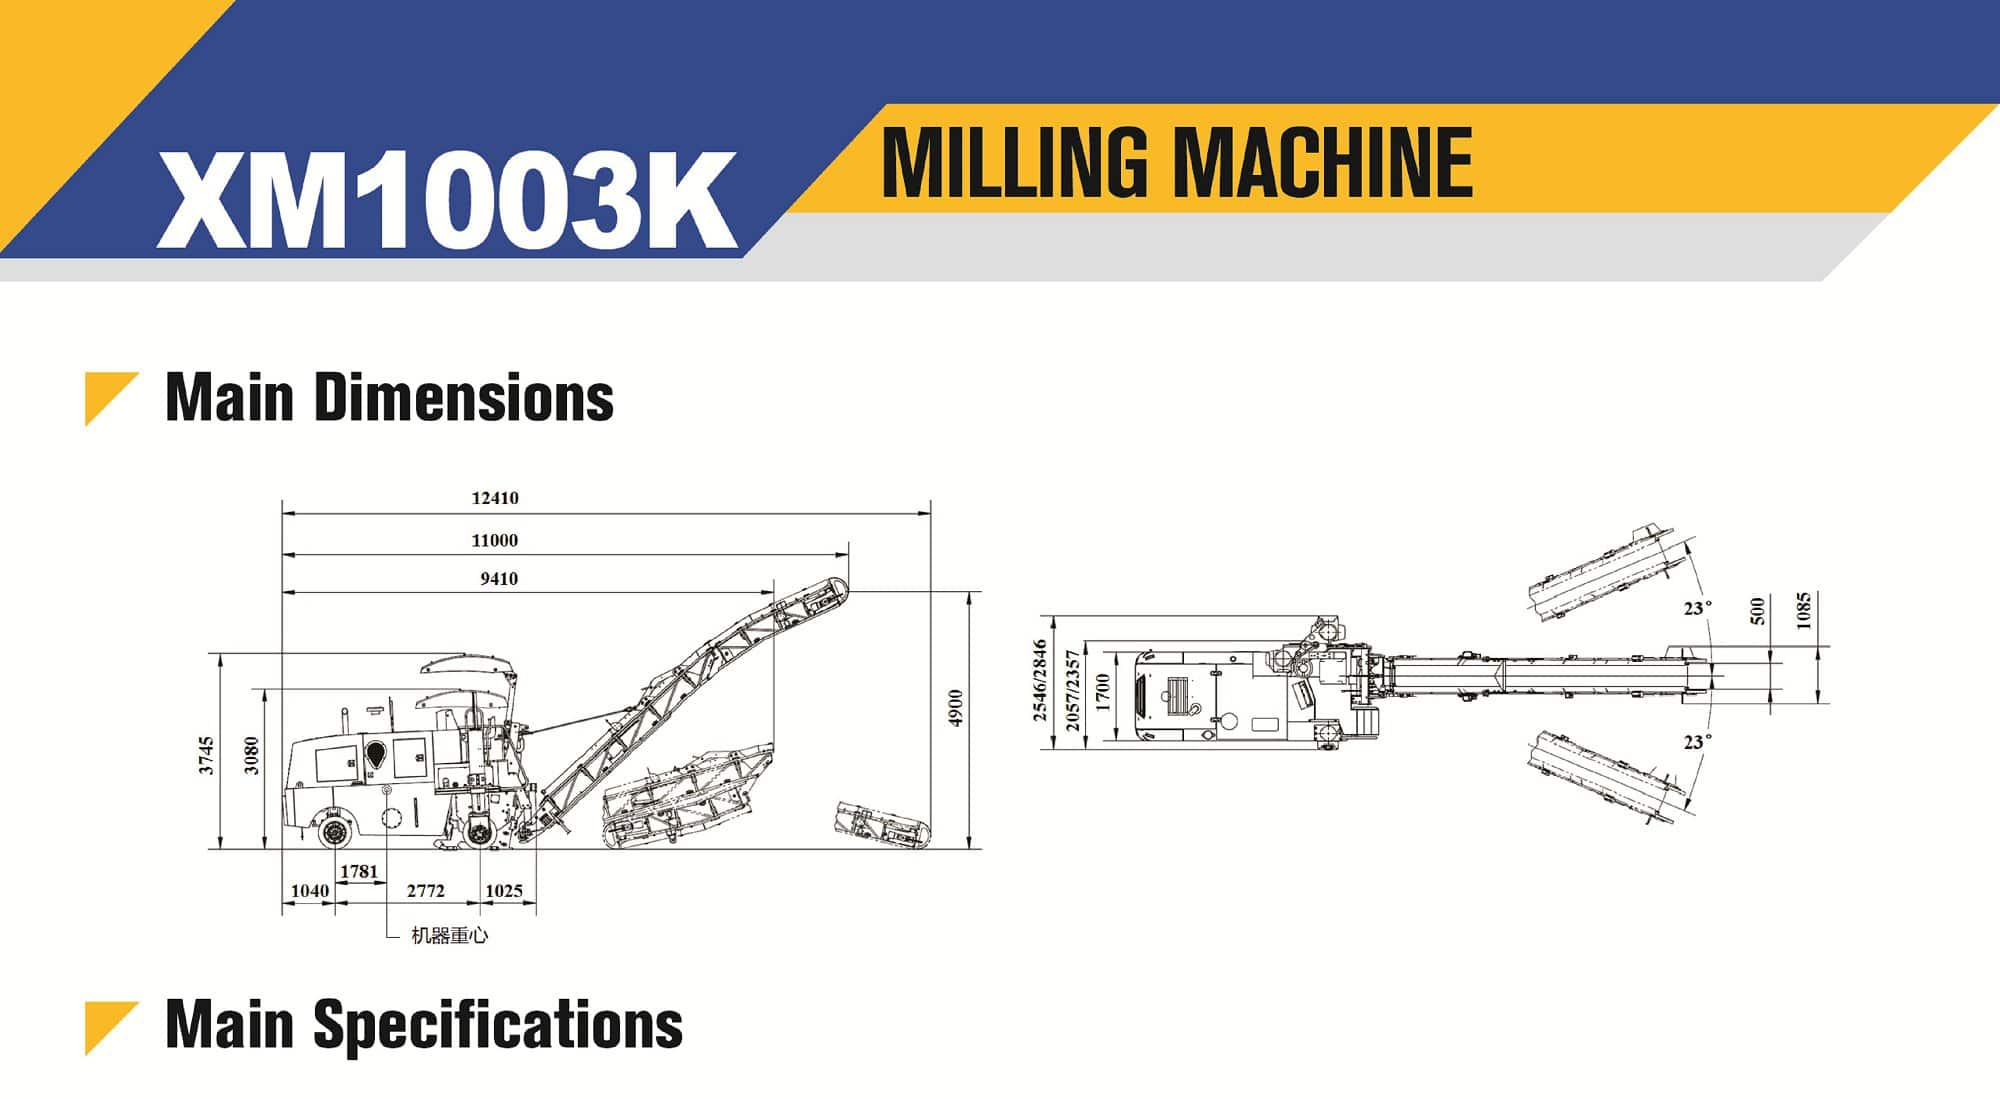 XCMG official XM1003K milling Machine for sale